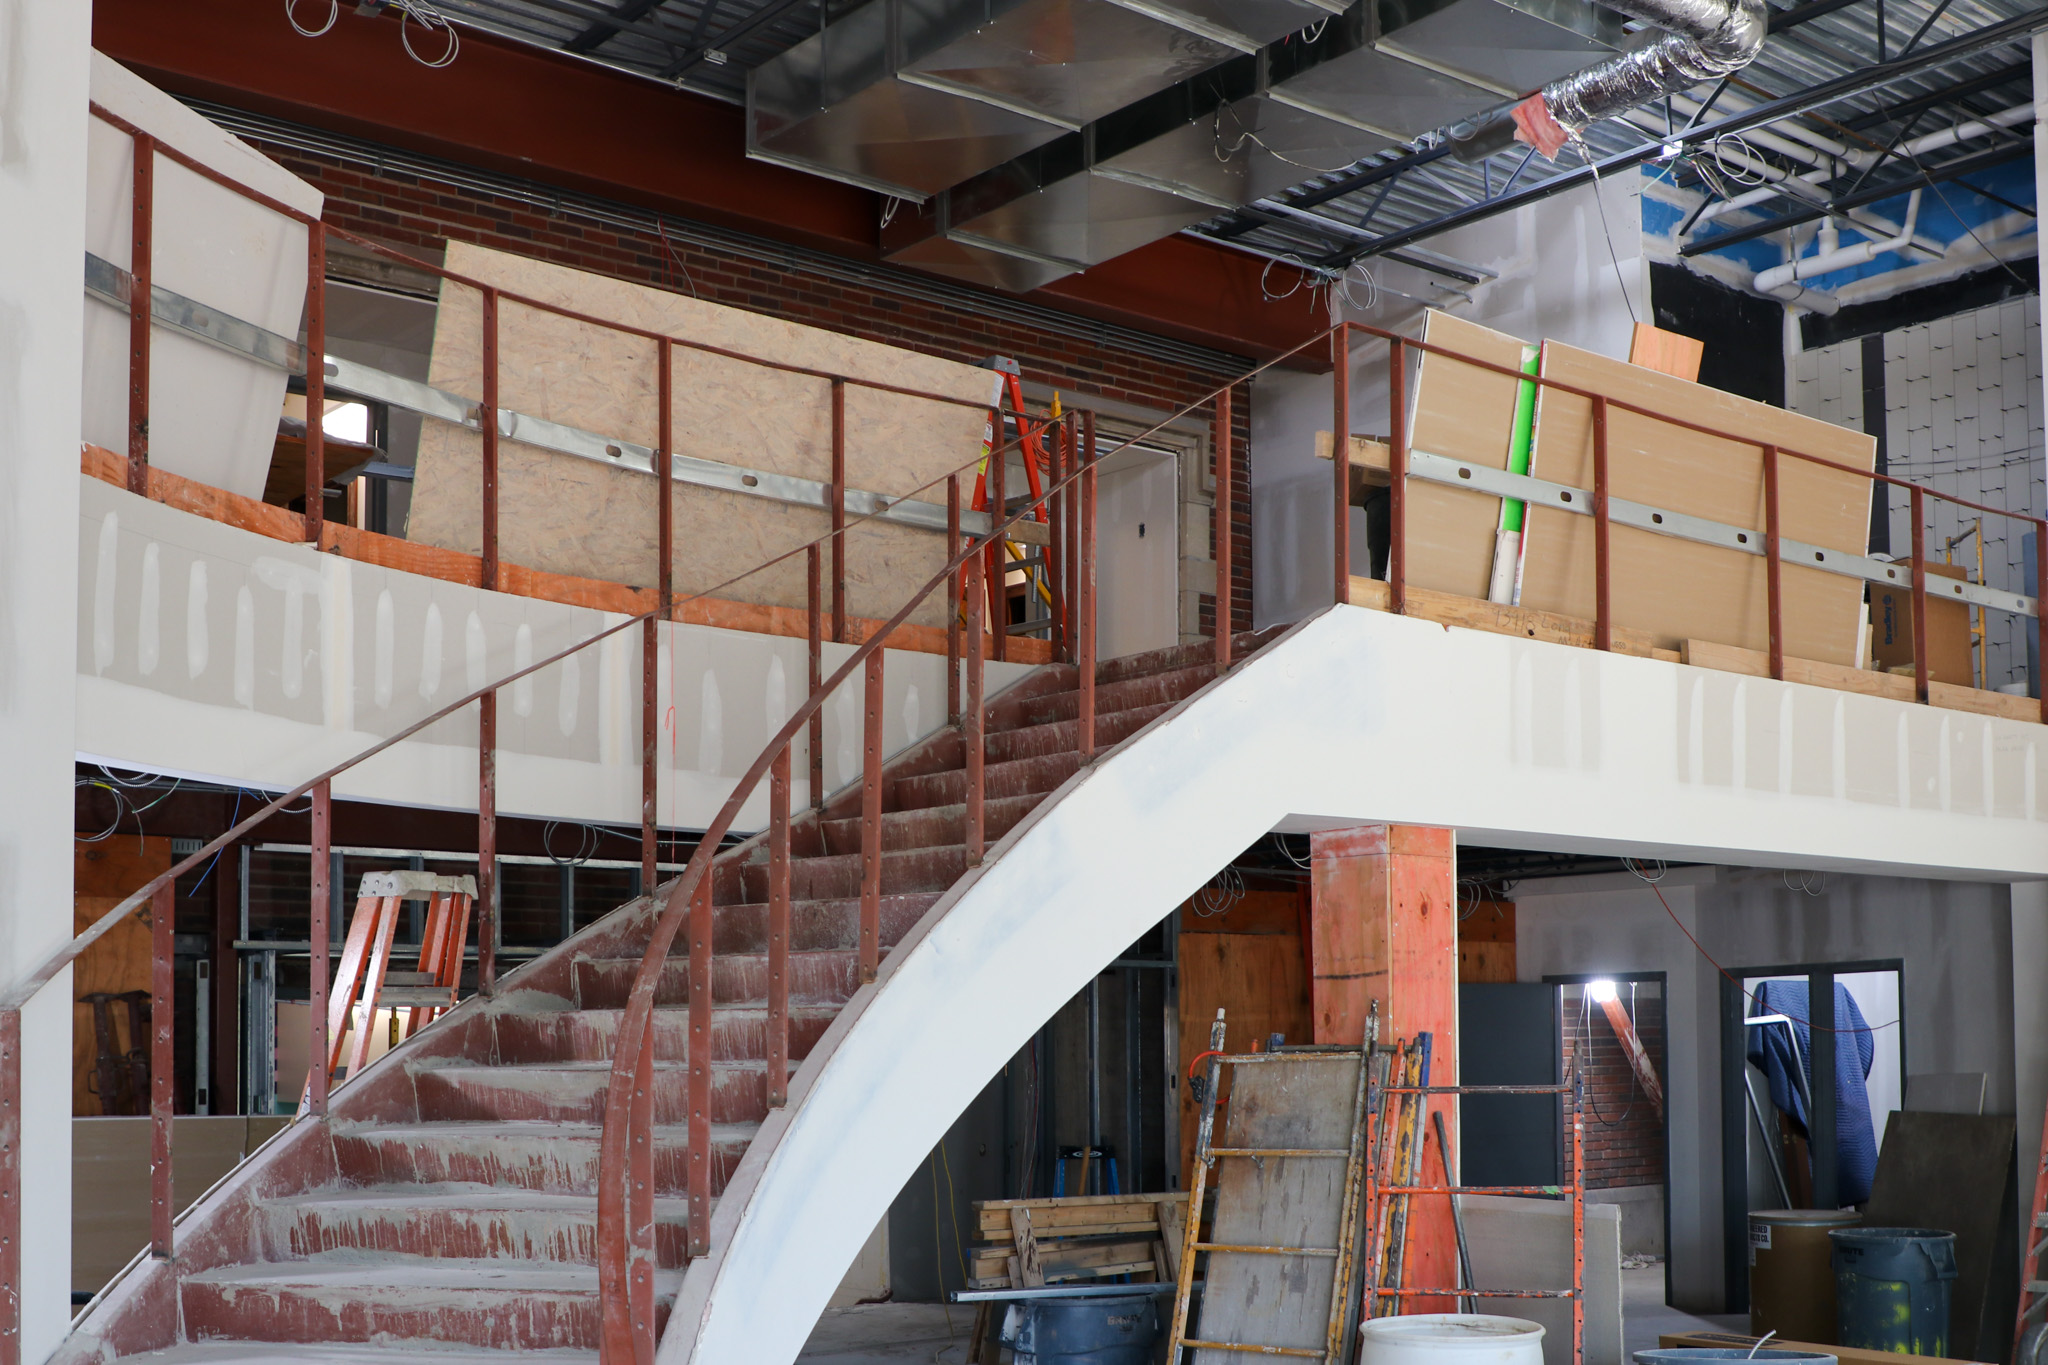 Staircase in building still being constructed